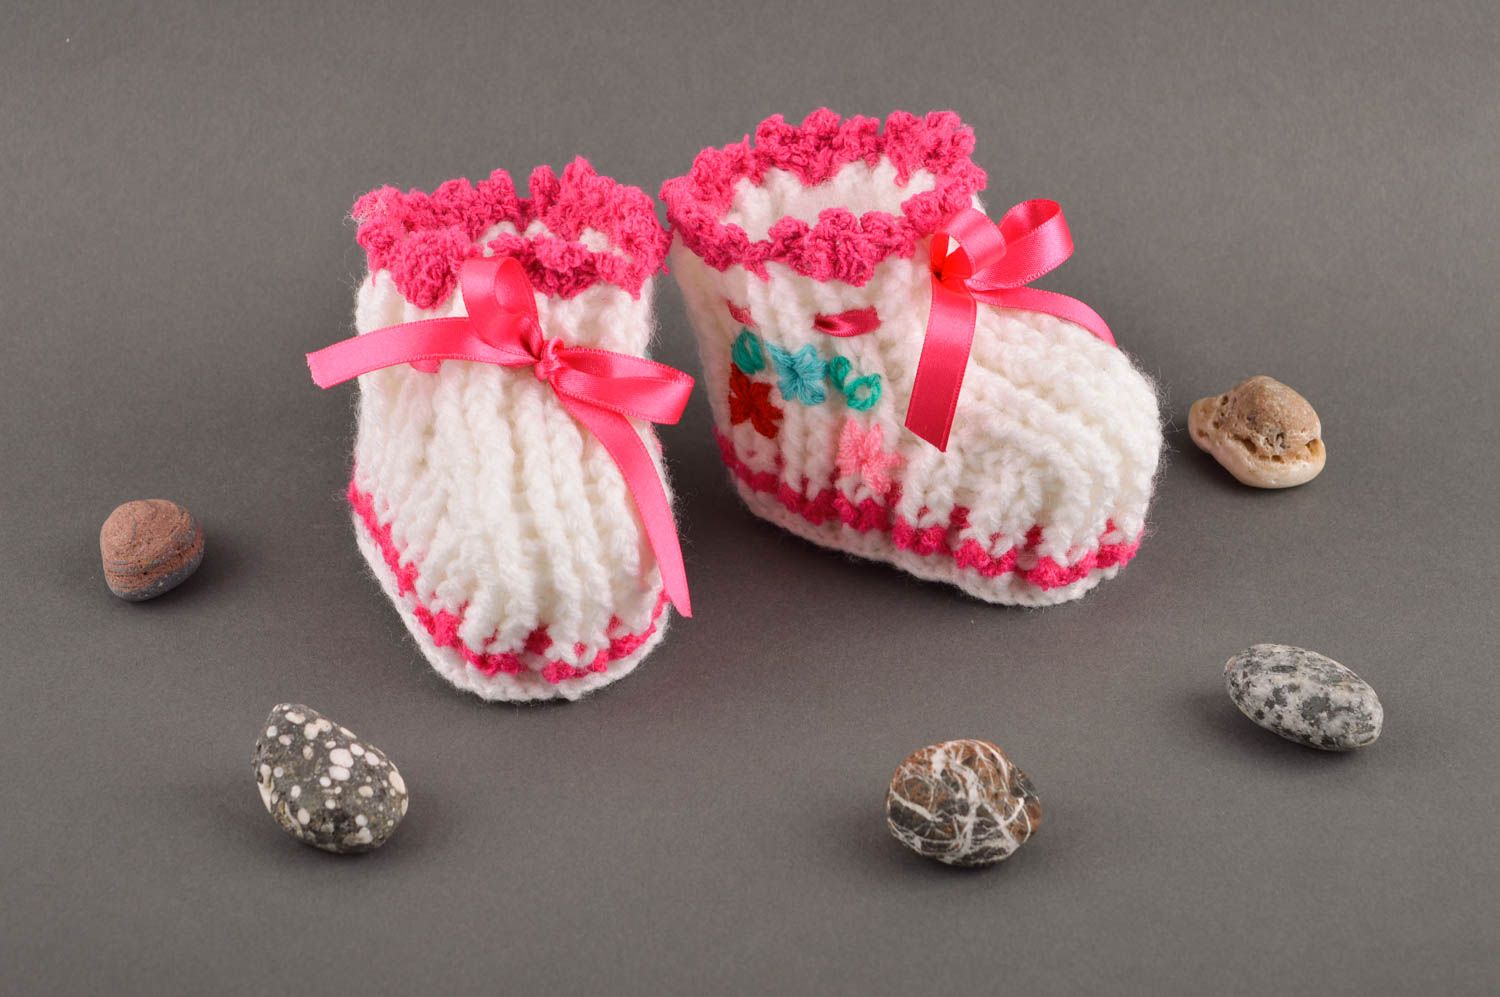 Homemade baby shoes baby booties crochet accessories goods for kids baby socks photo 1